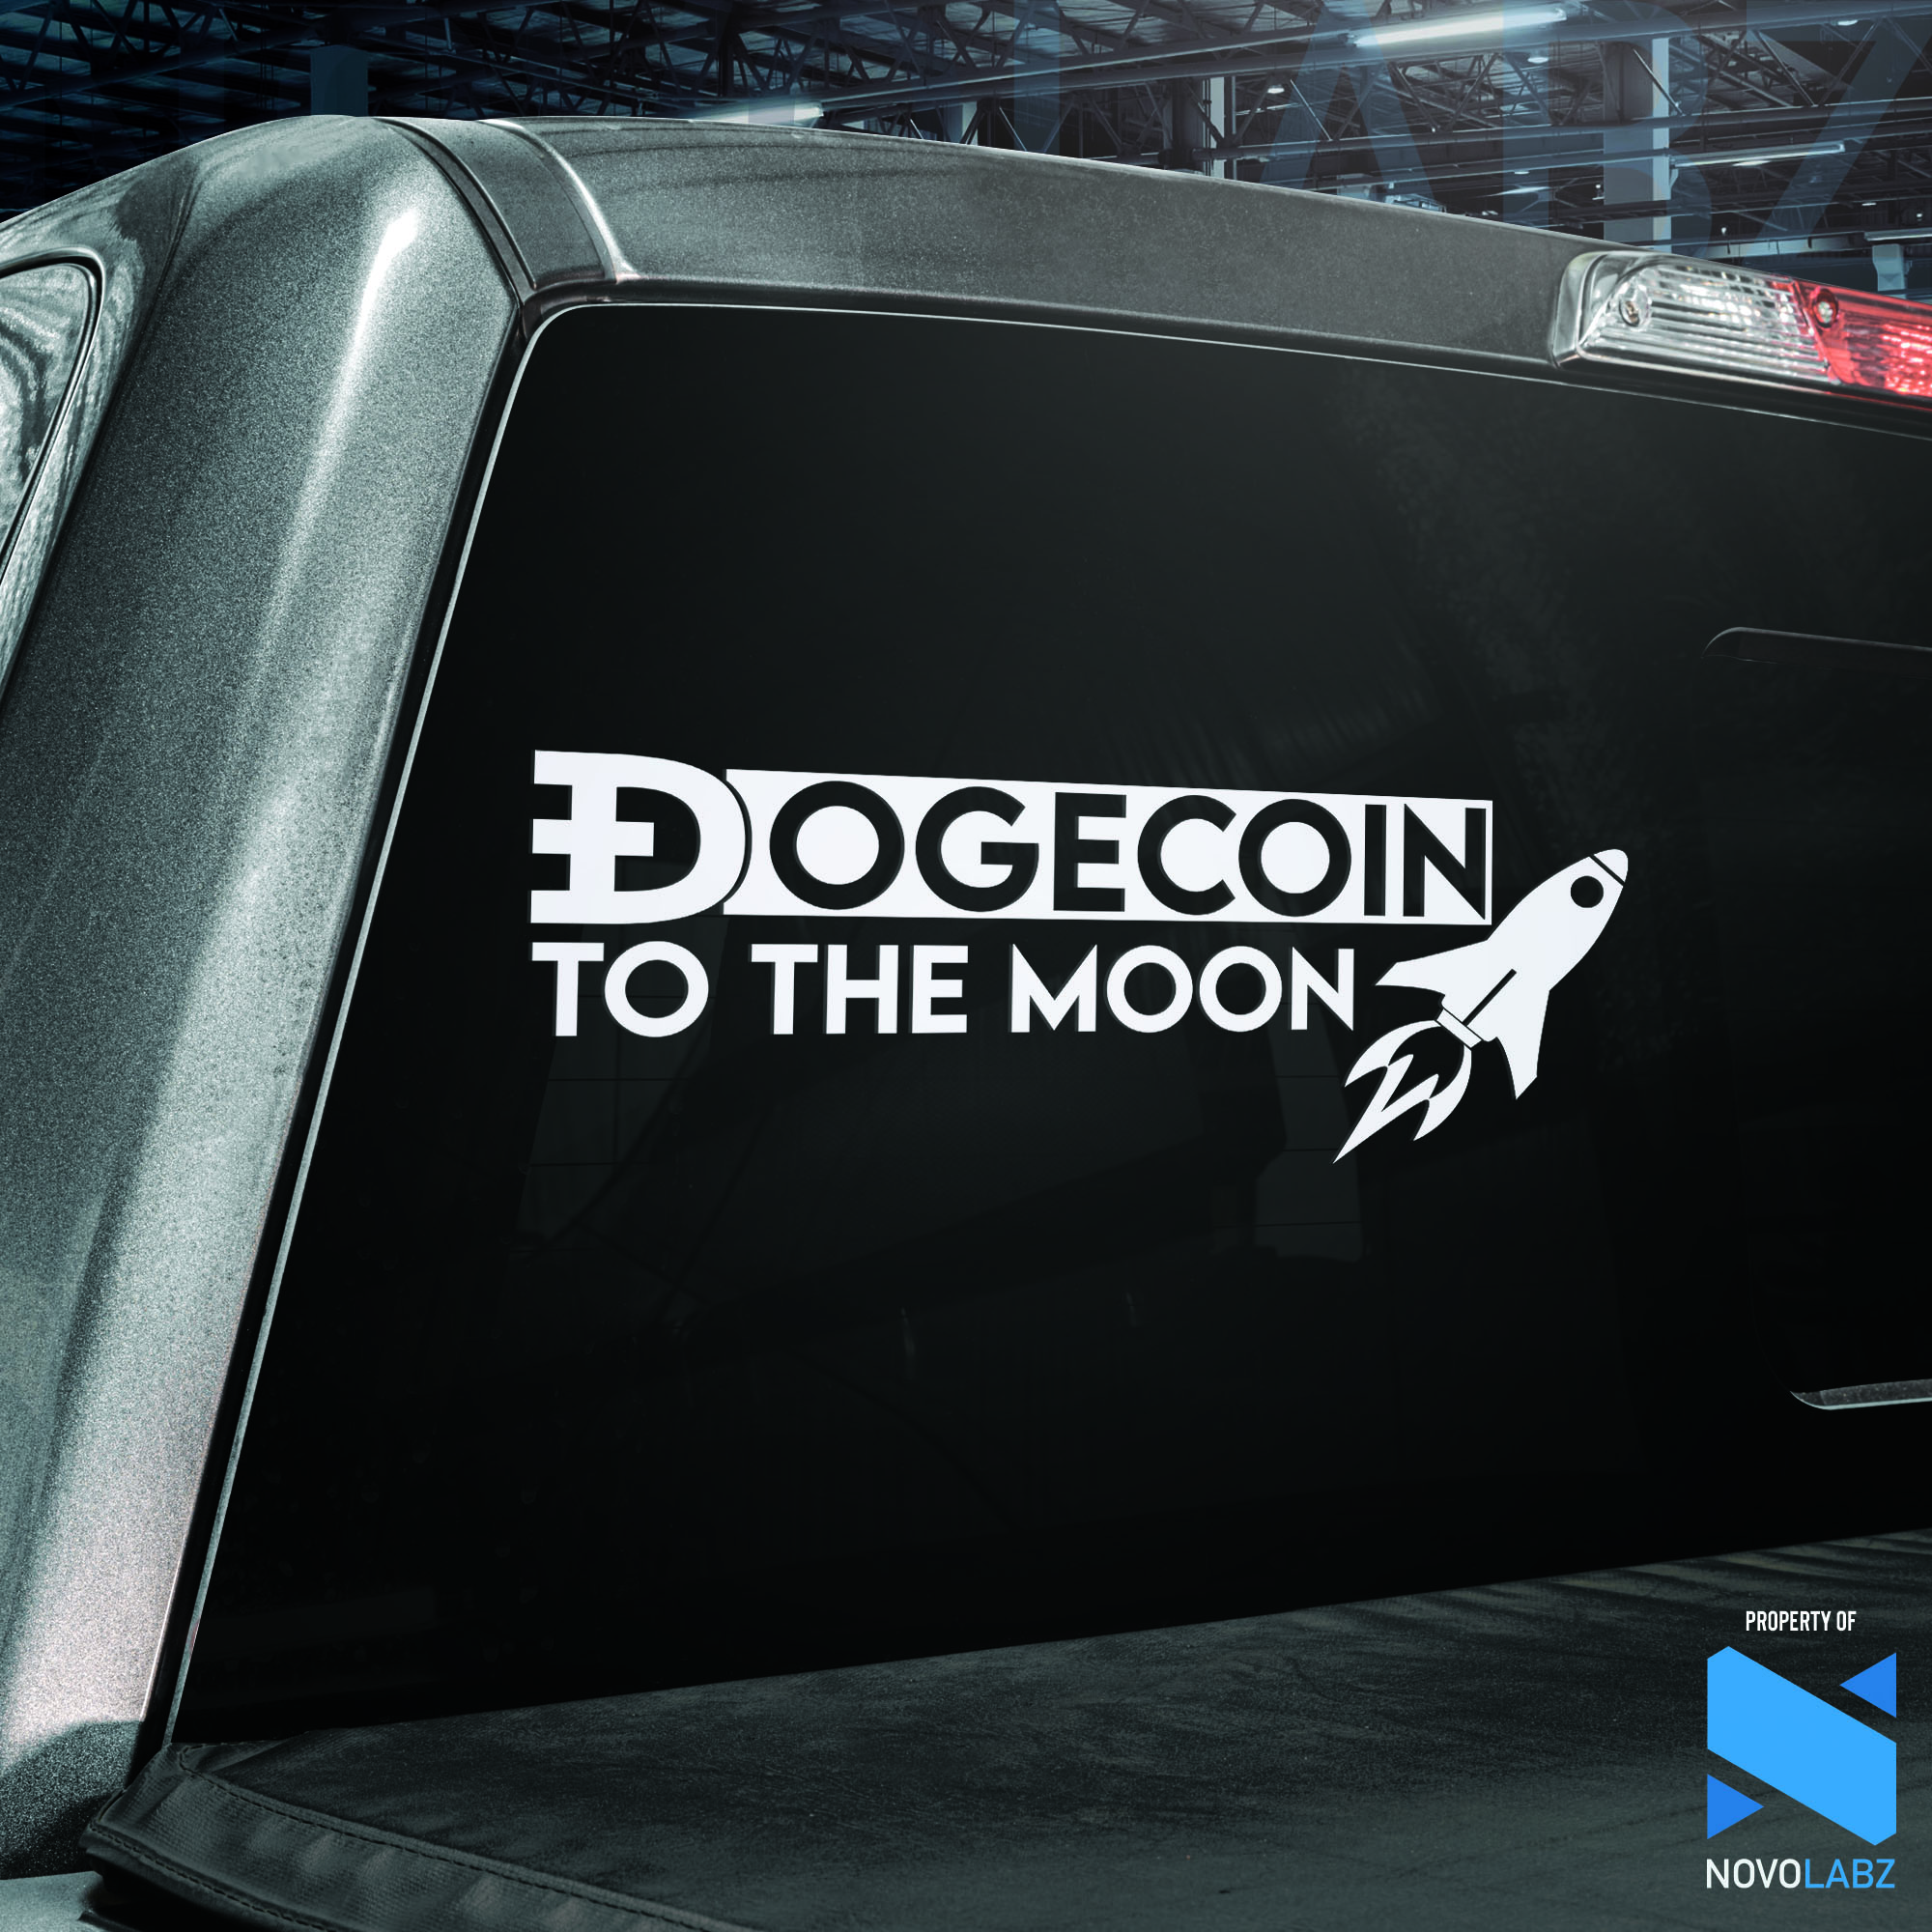 Dodgecoin To The Moon Vinyl Decal